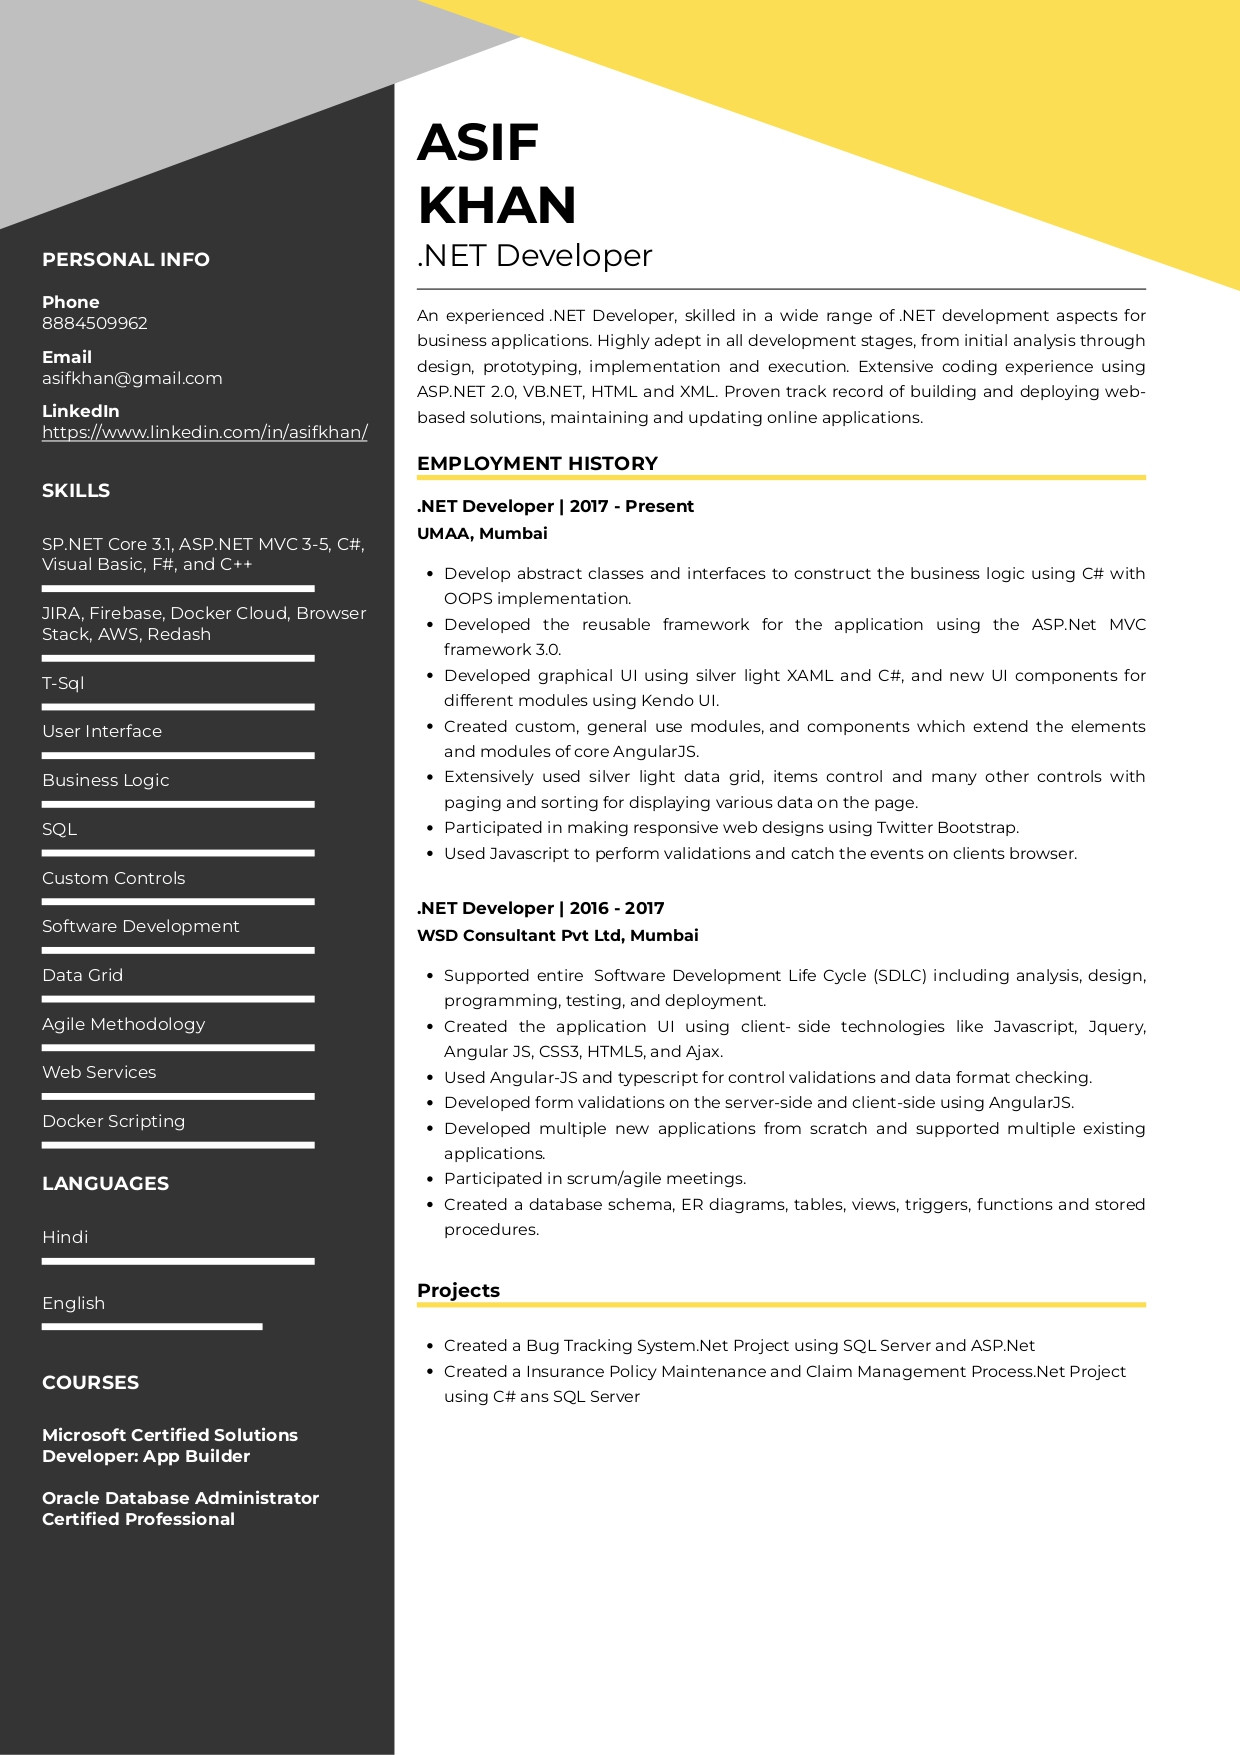 Salesfor Developer Sample Resumes for Healthcare and Insurance Domain Sample Resume Of Salesforce Developer with Template & Writing …